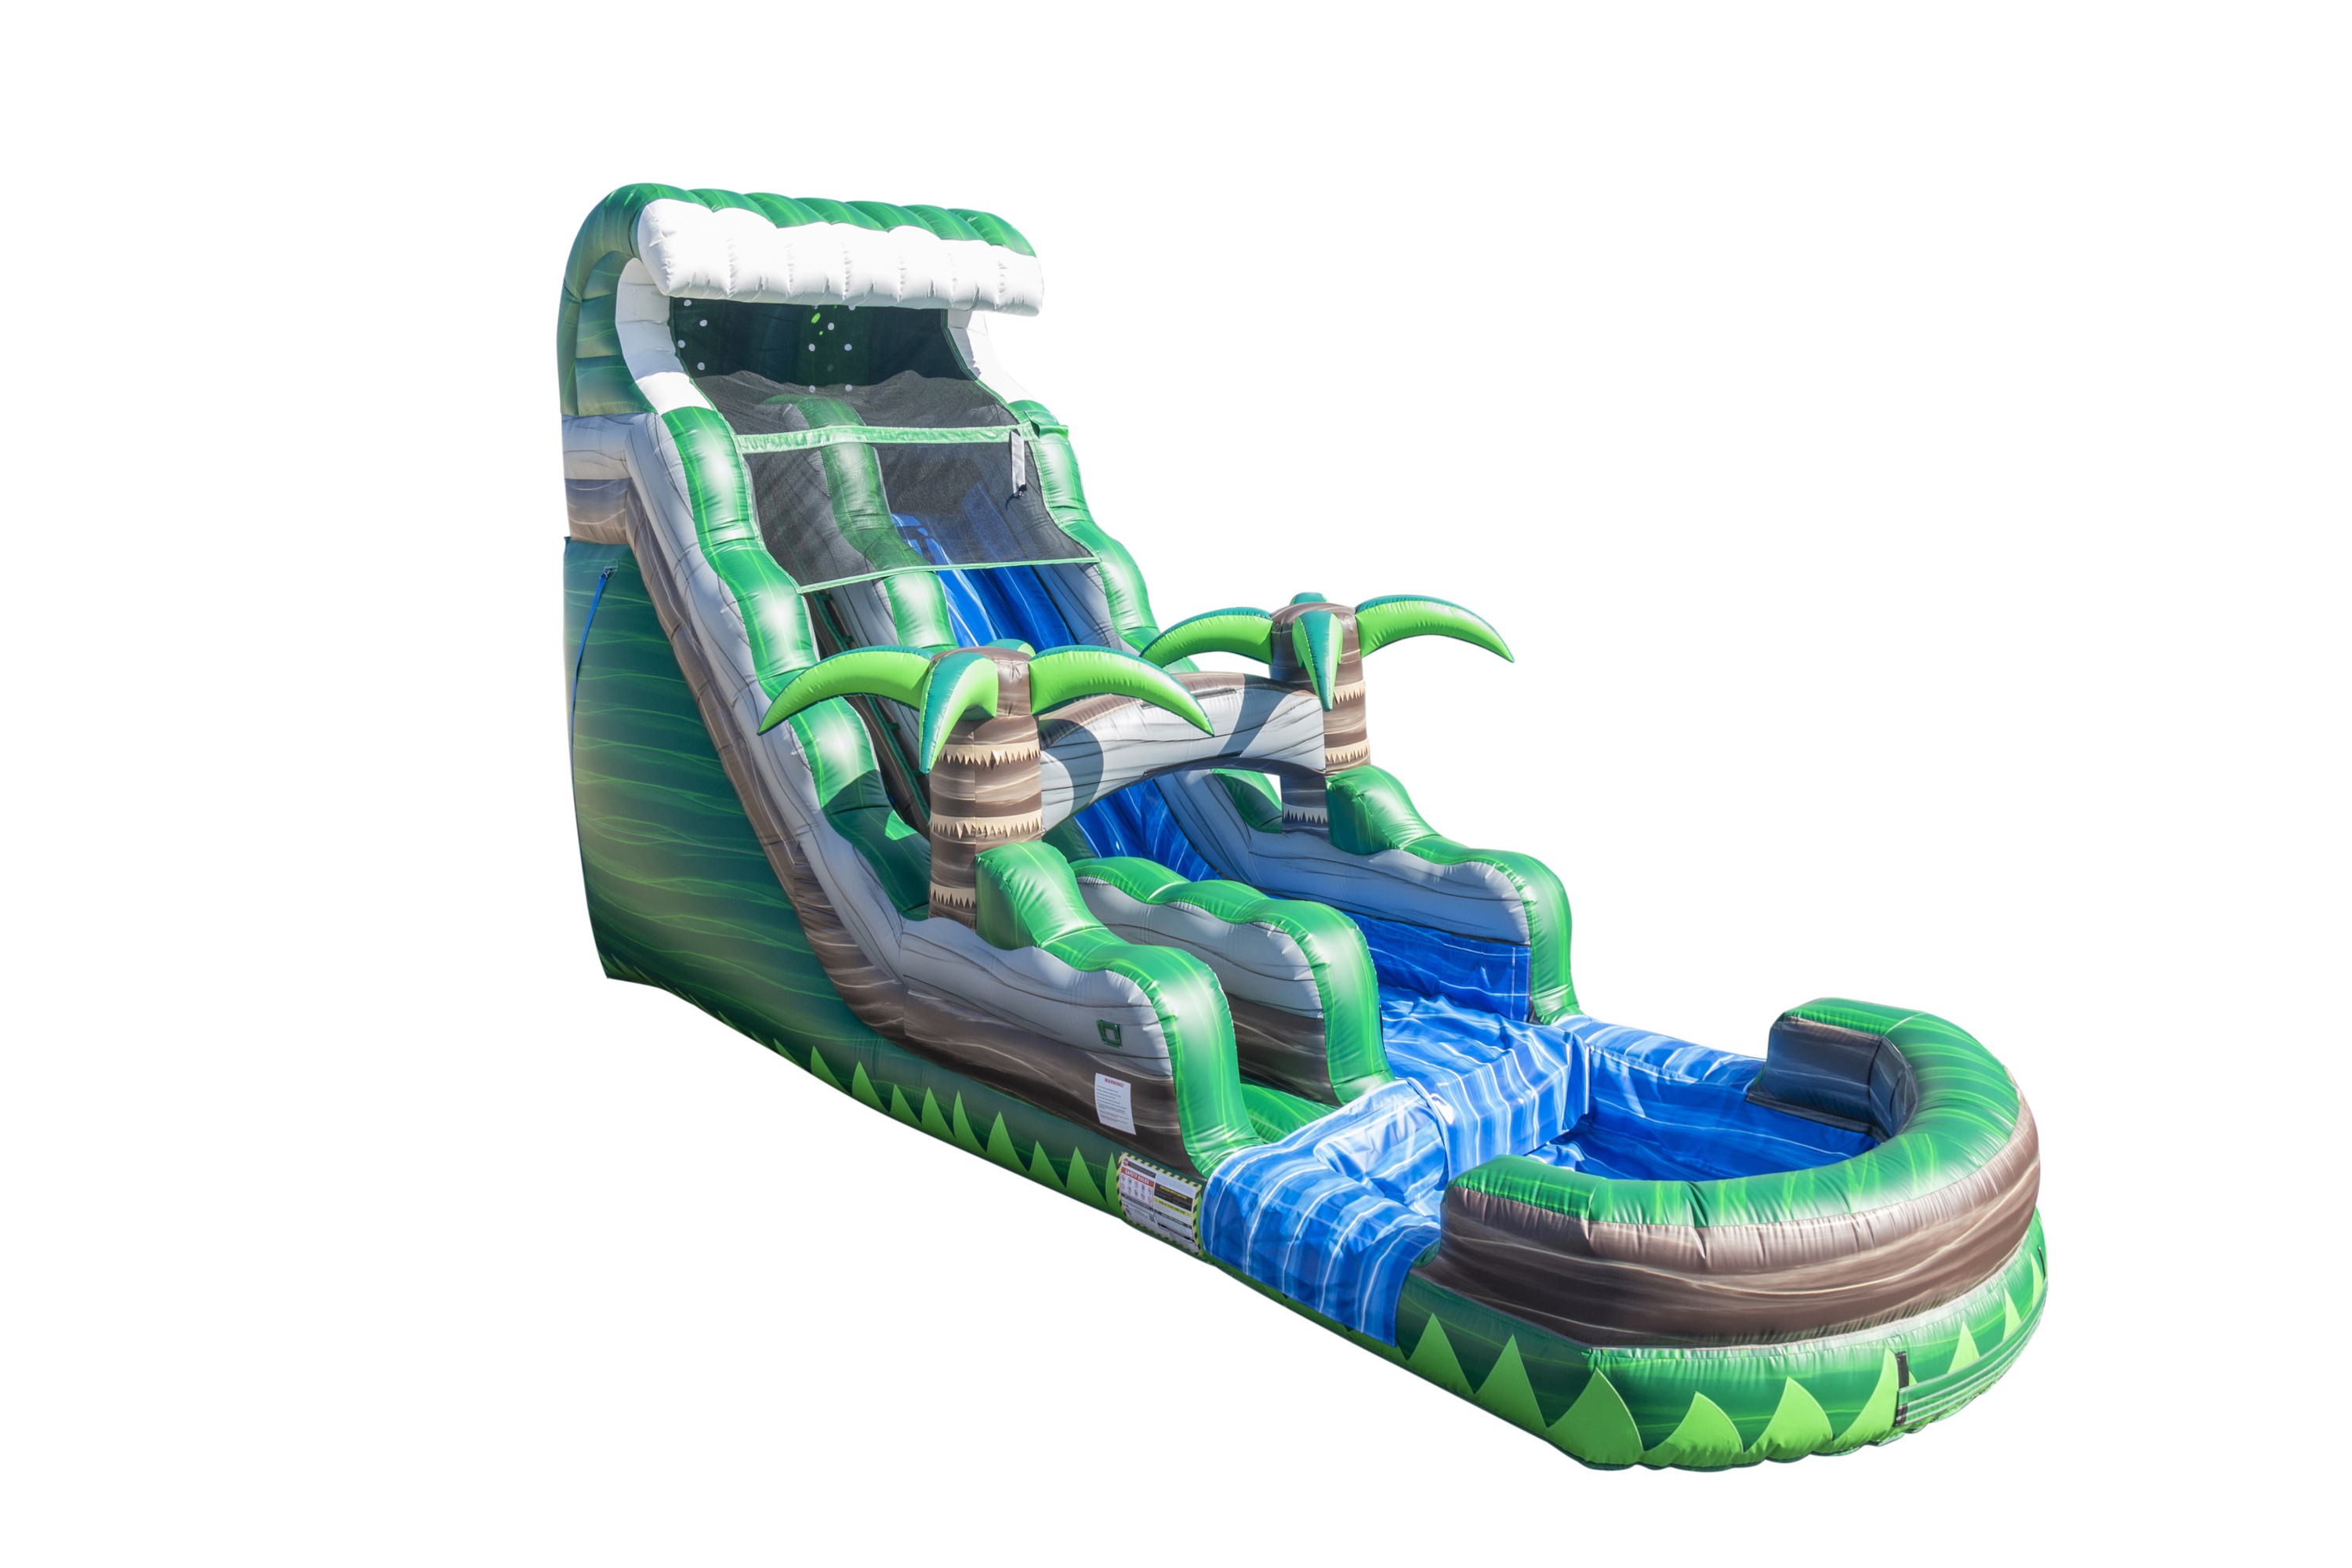 Inflatable slide rentals from Alaka'i Inflatables & Party Rentals